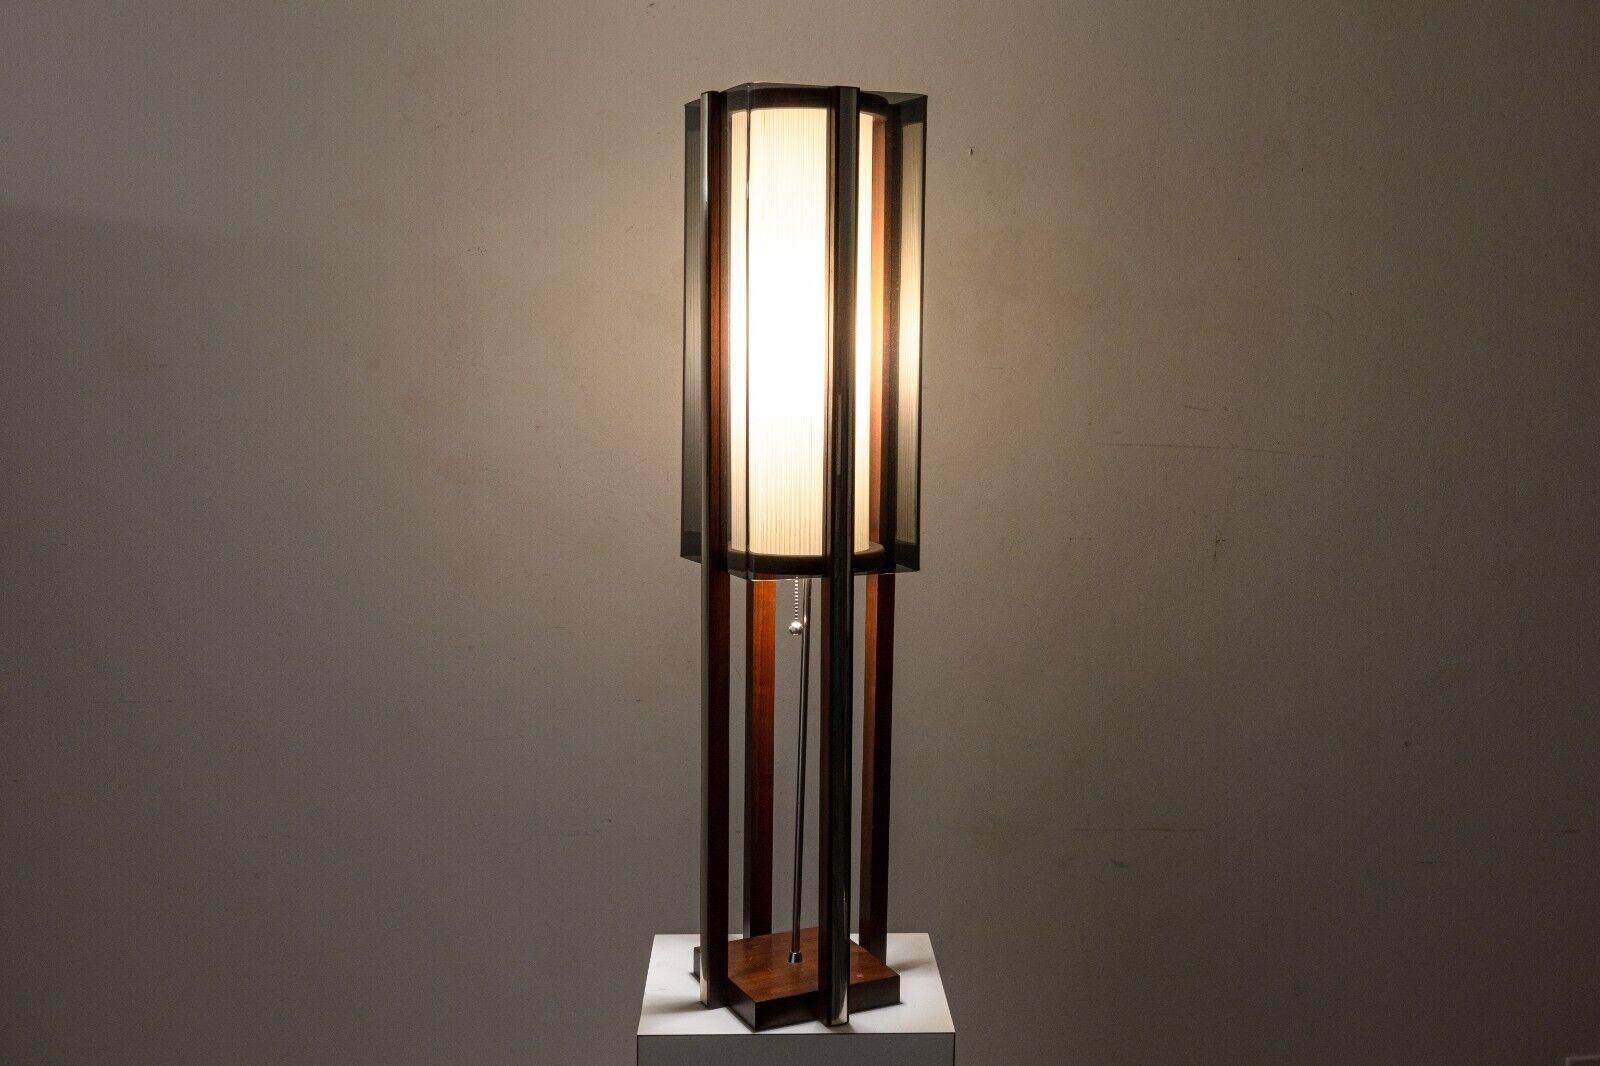 A vintage mid century modern large table lamp. This beautiful table lamps features a lovely mcm design with a great choice of materials such as a walnut wood frame, smoked lucite shades, and chrome accents. This piece gives off a wonderful warm